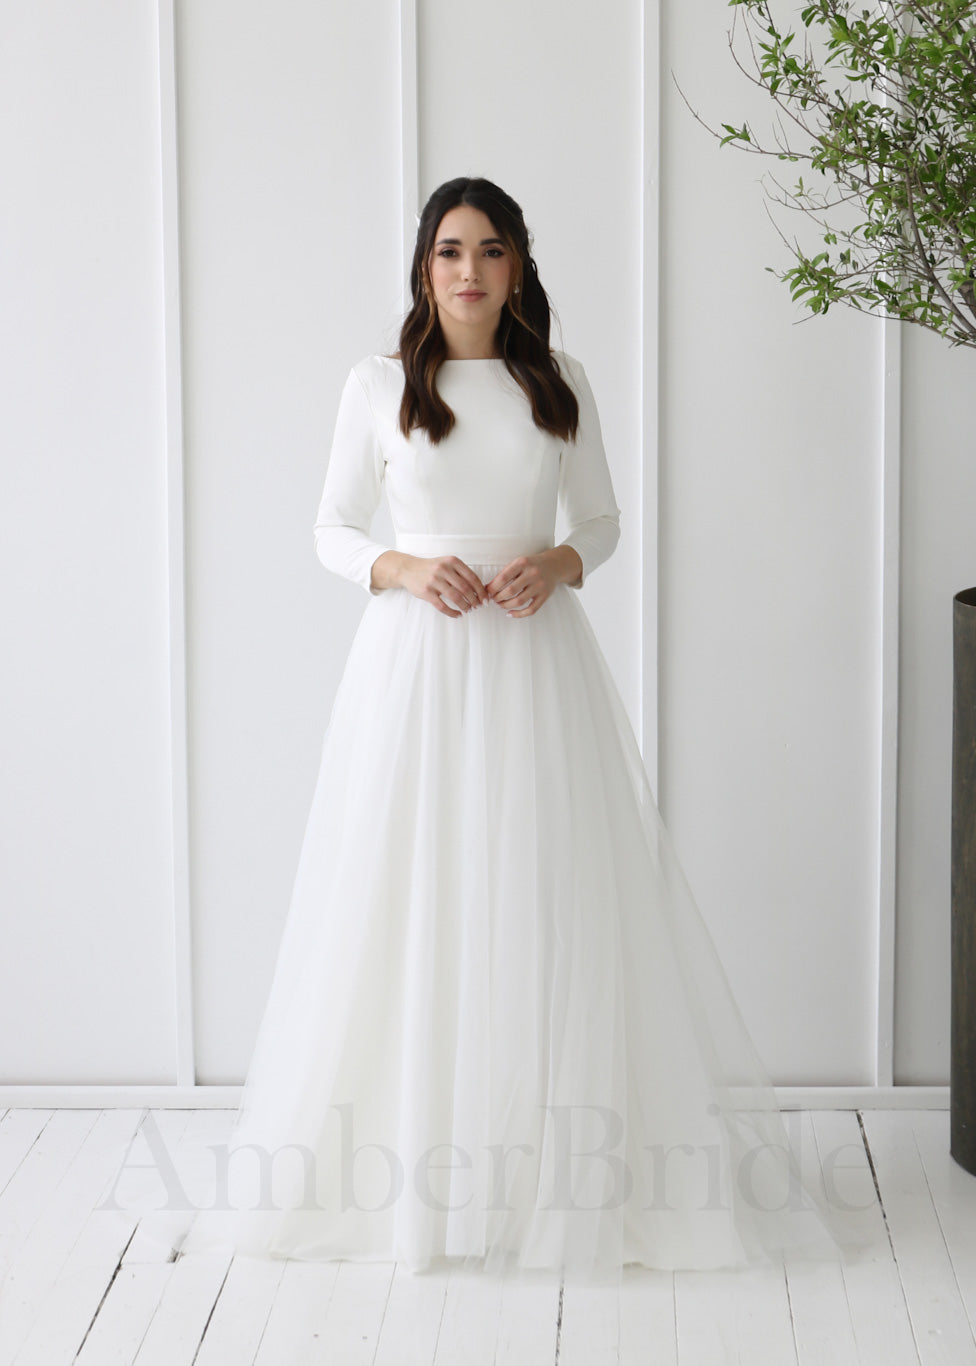 Minimalist Satin and Tulle Wedding Dress with Long Sleeves and Backless Design